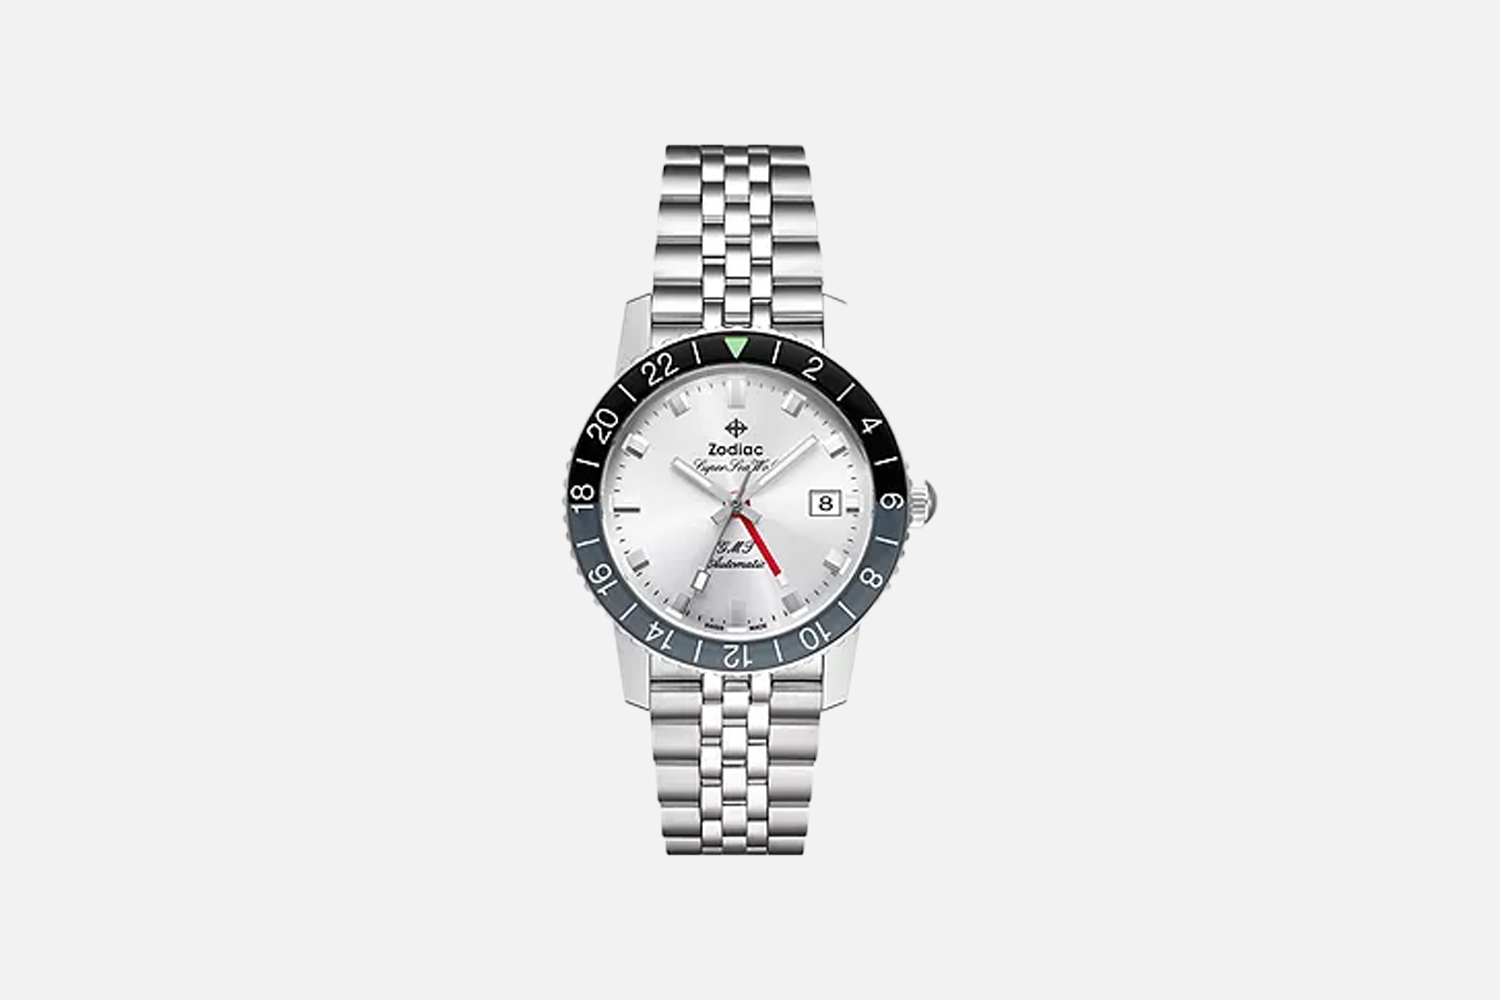 Zodiac Super Sea Wolf GMT Automatic Stainless Steel Watch